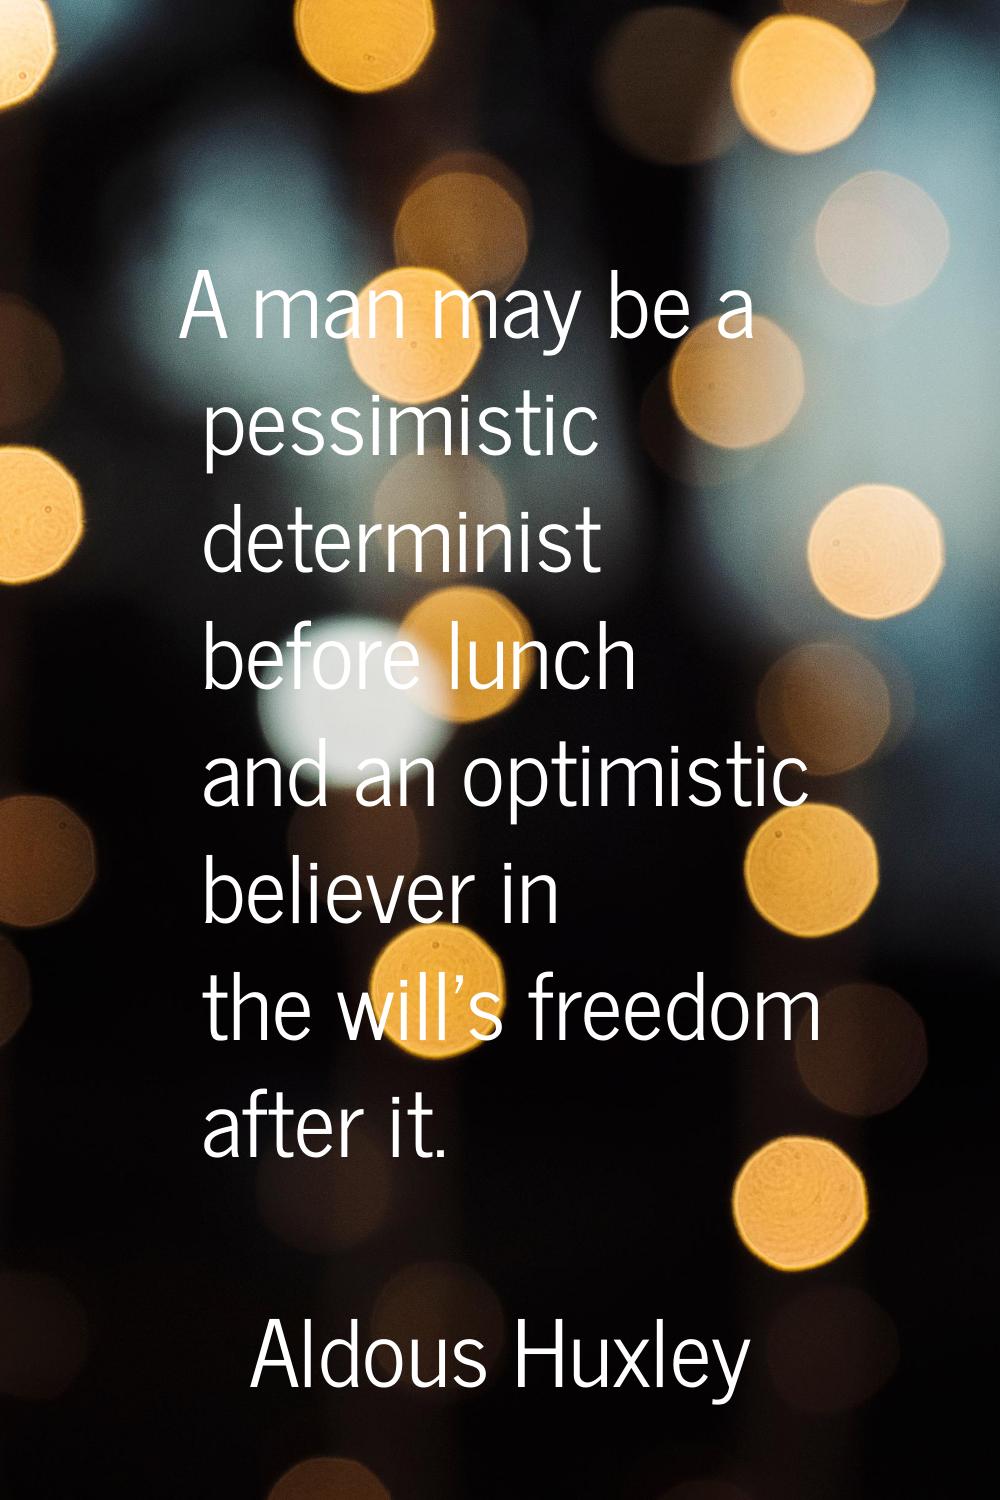 A man may be a pessimistic determinist before lunch and an optimistic believer in the will's freedo